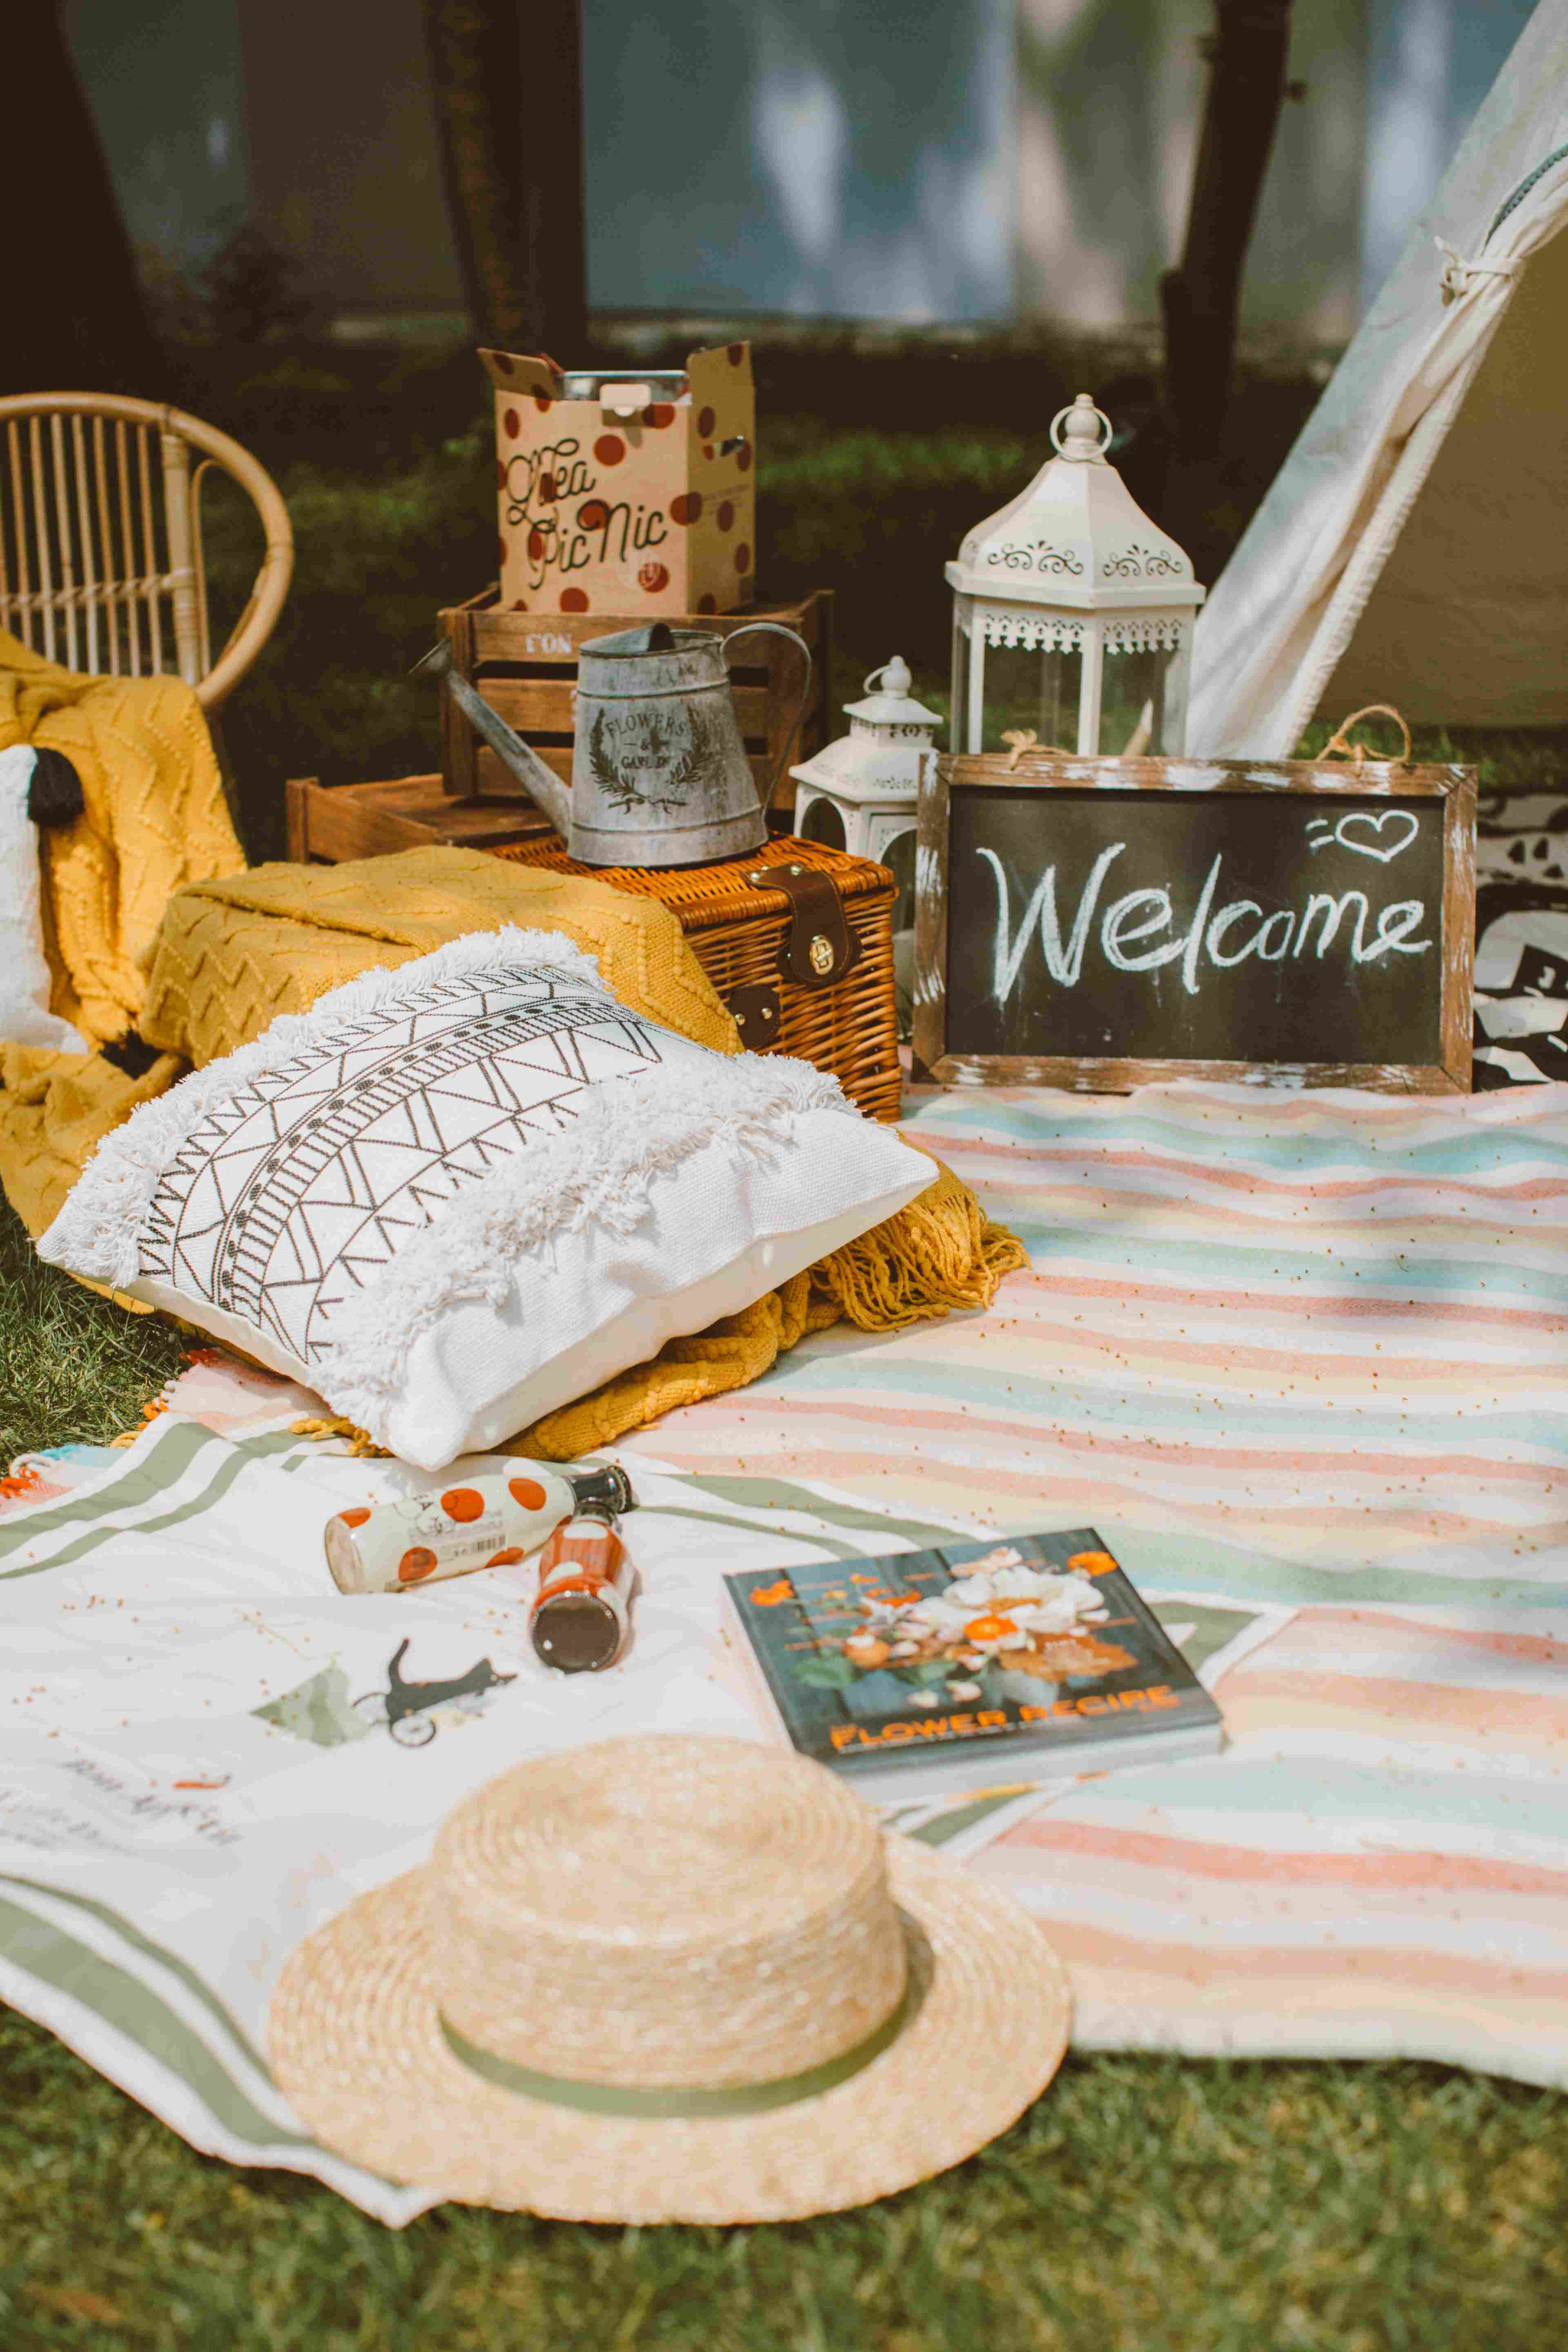 picnic scene with blankets and pillows and welcome board